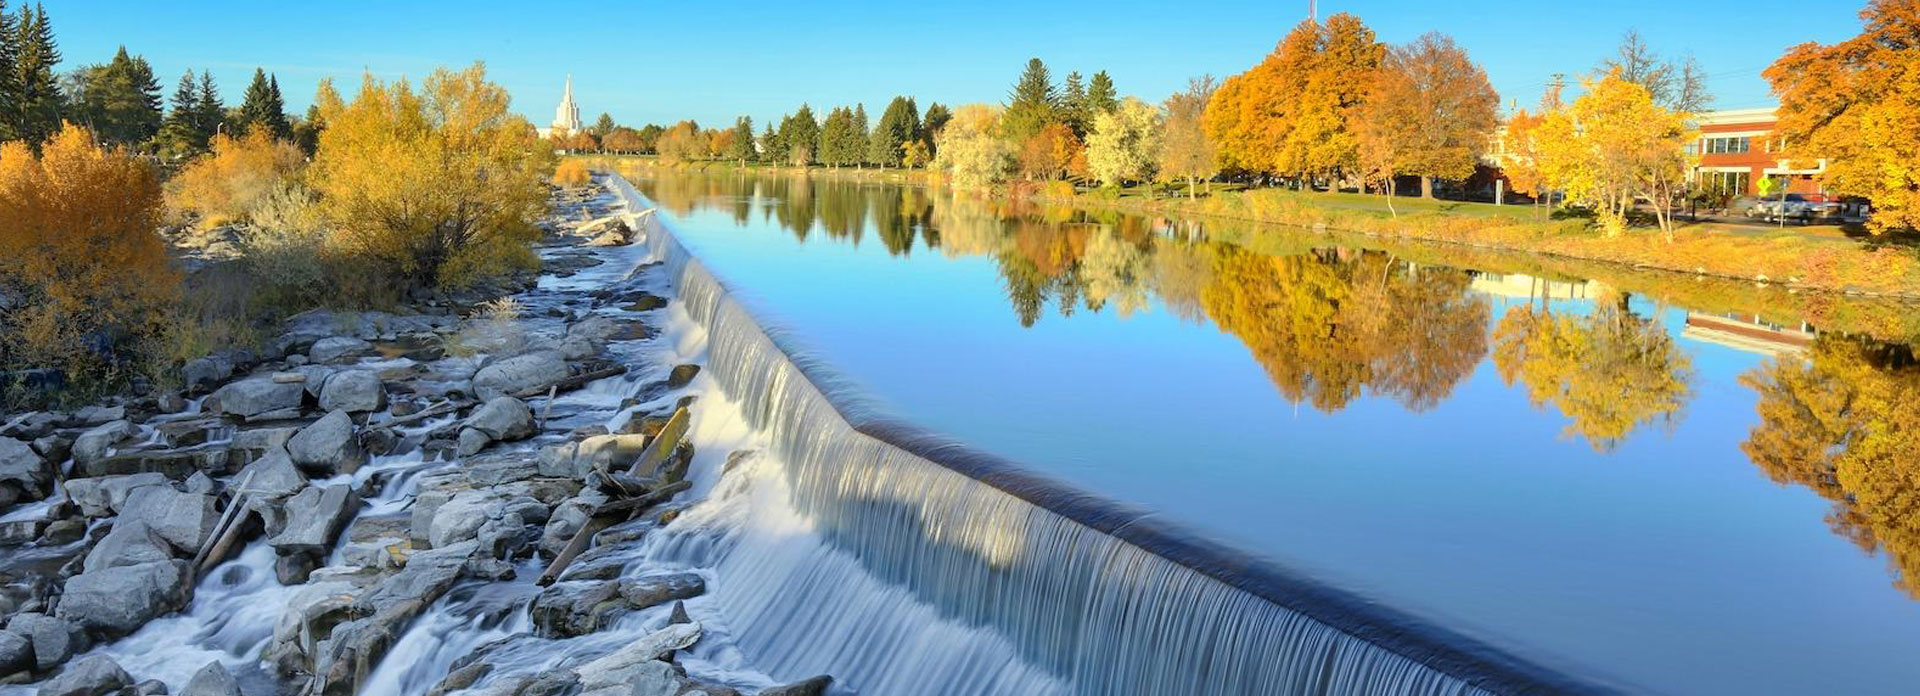 Idaho Falls: Your Jumping Off Point to National Parks - Visit USA Parks